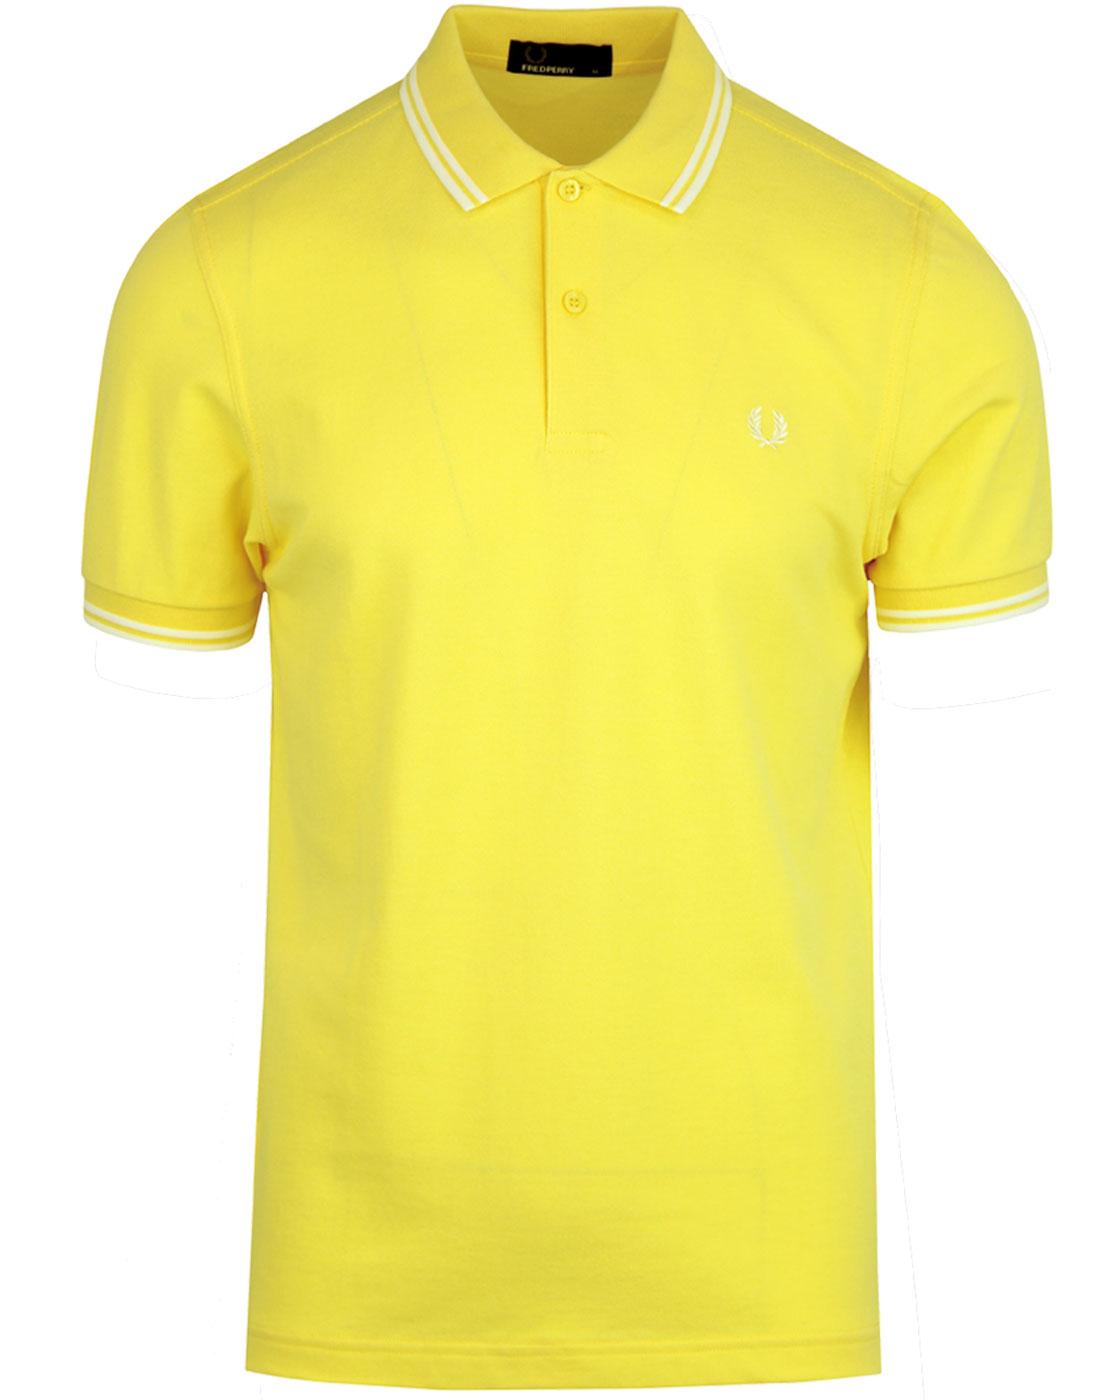 FRED PERRY M3600 Mod Twin Tipped Polo Shirt YELLOW